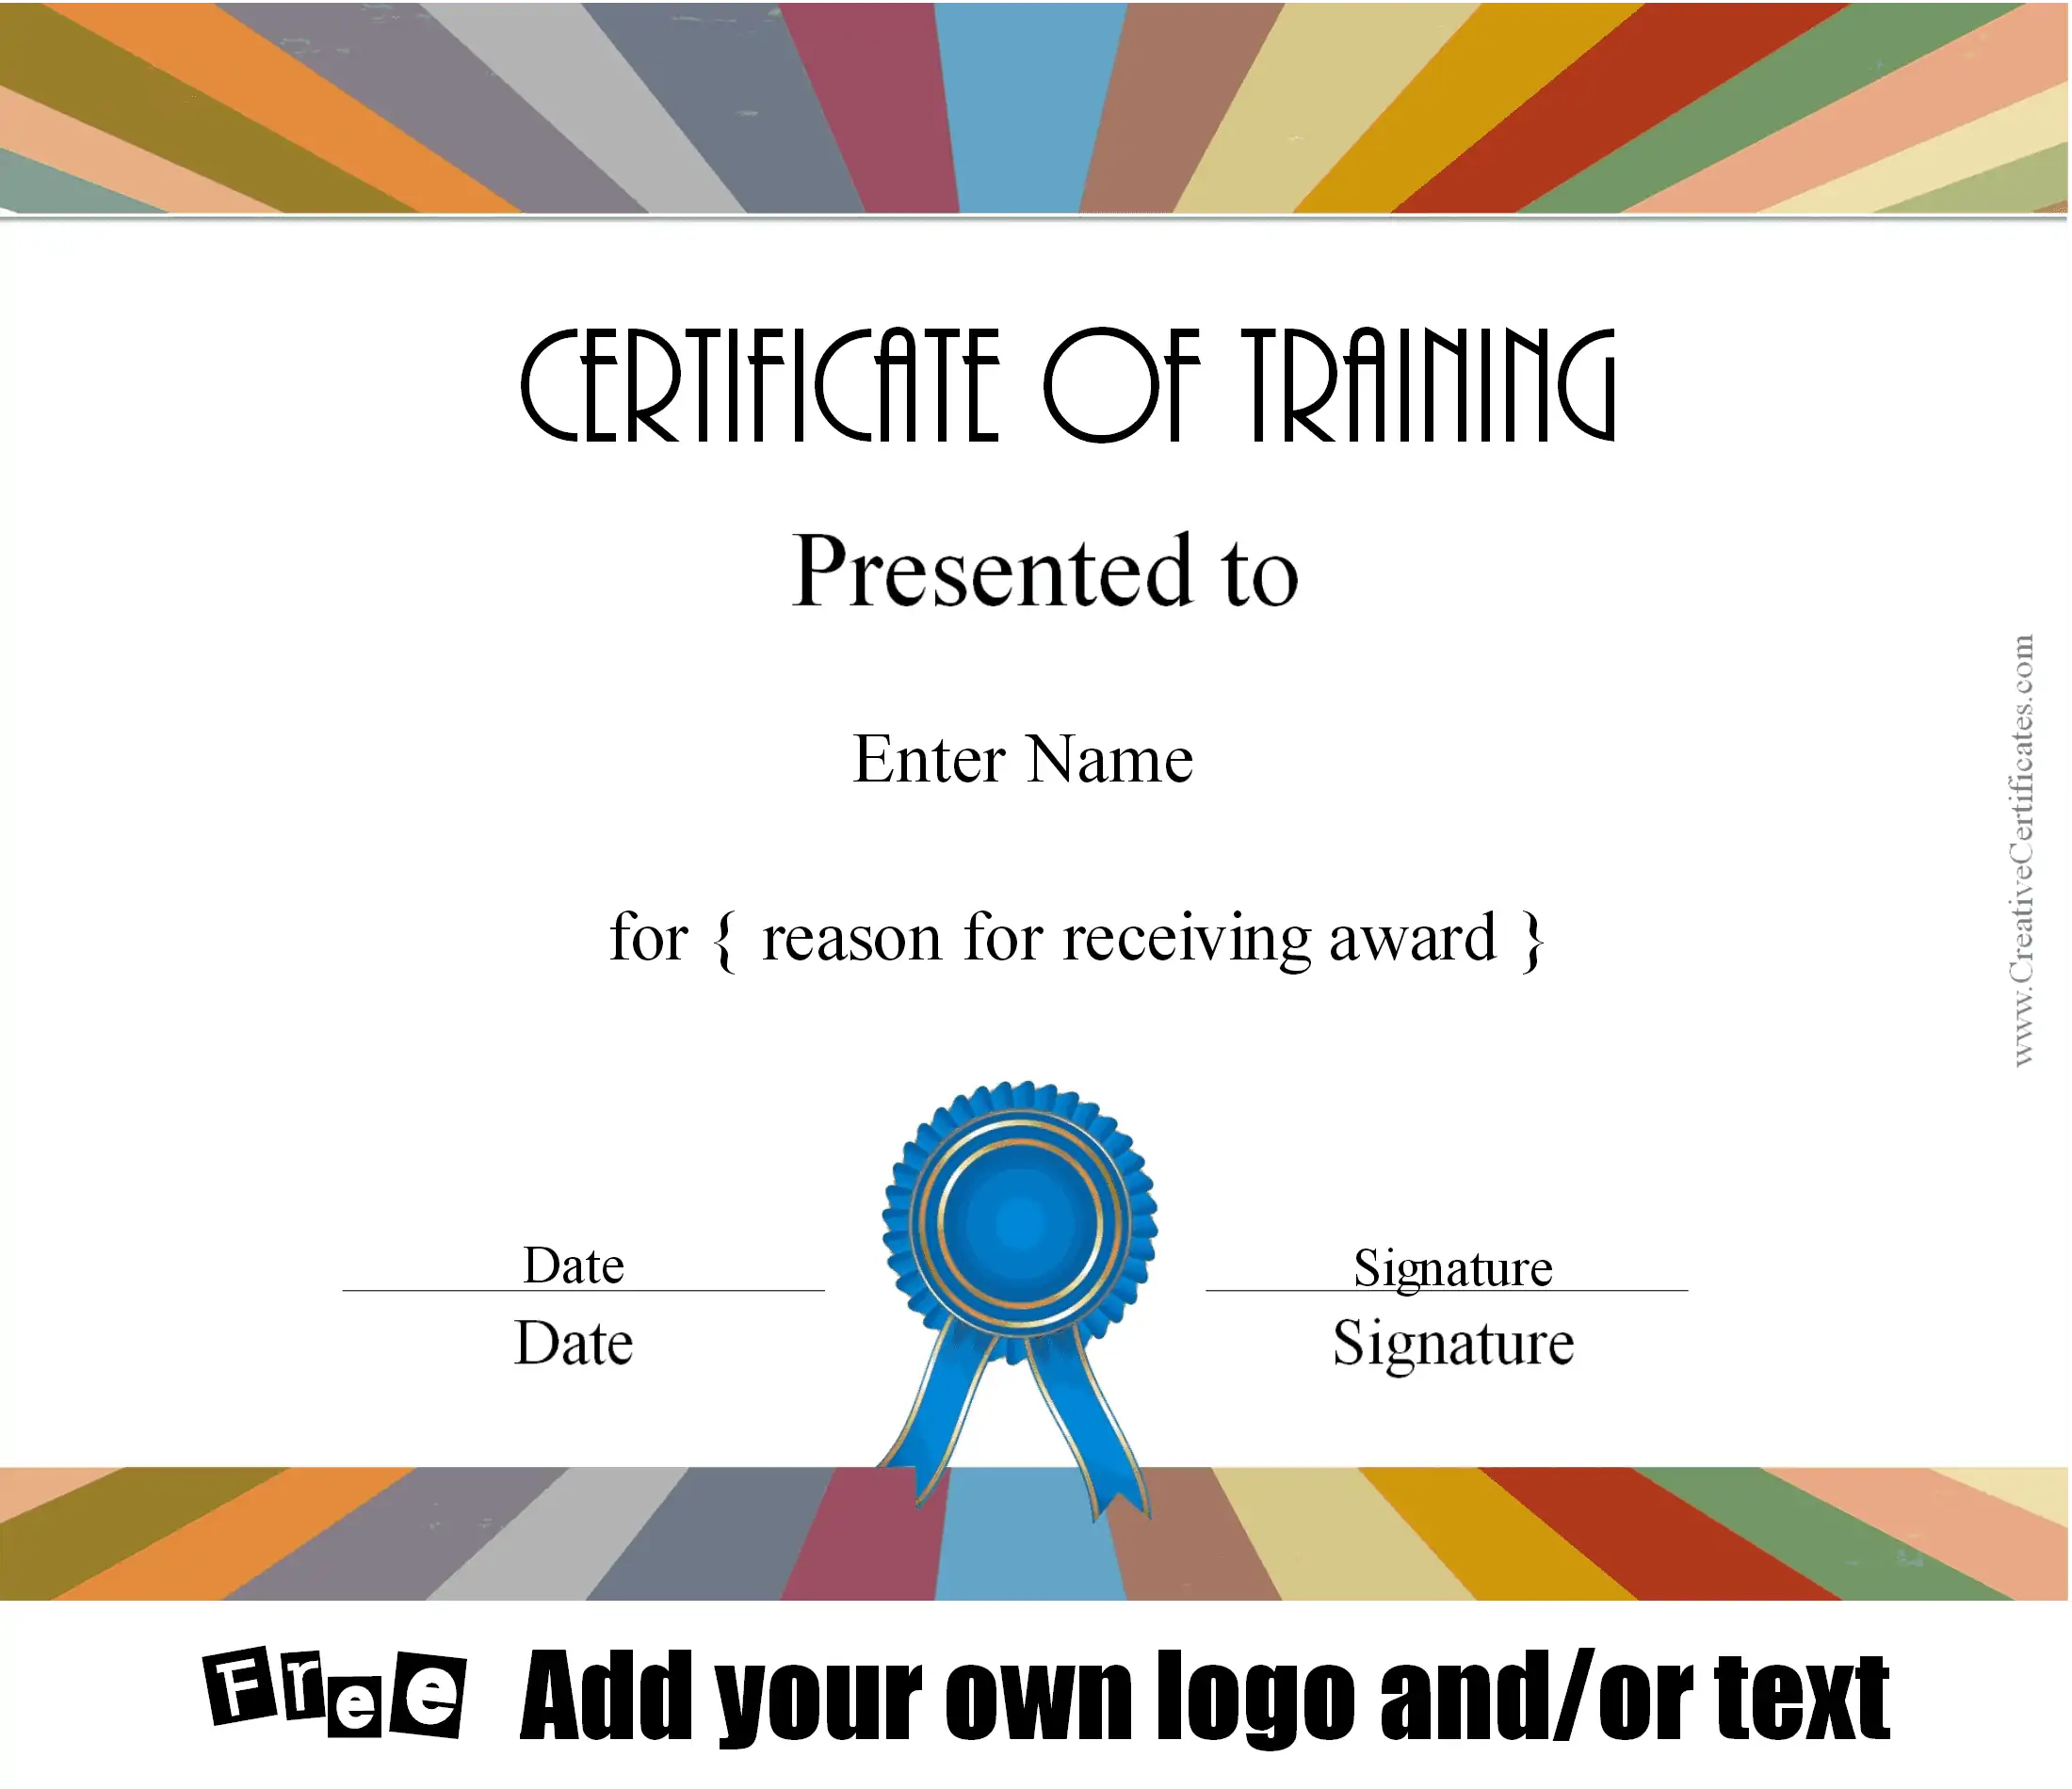 Diploma for training course